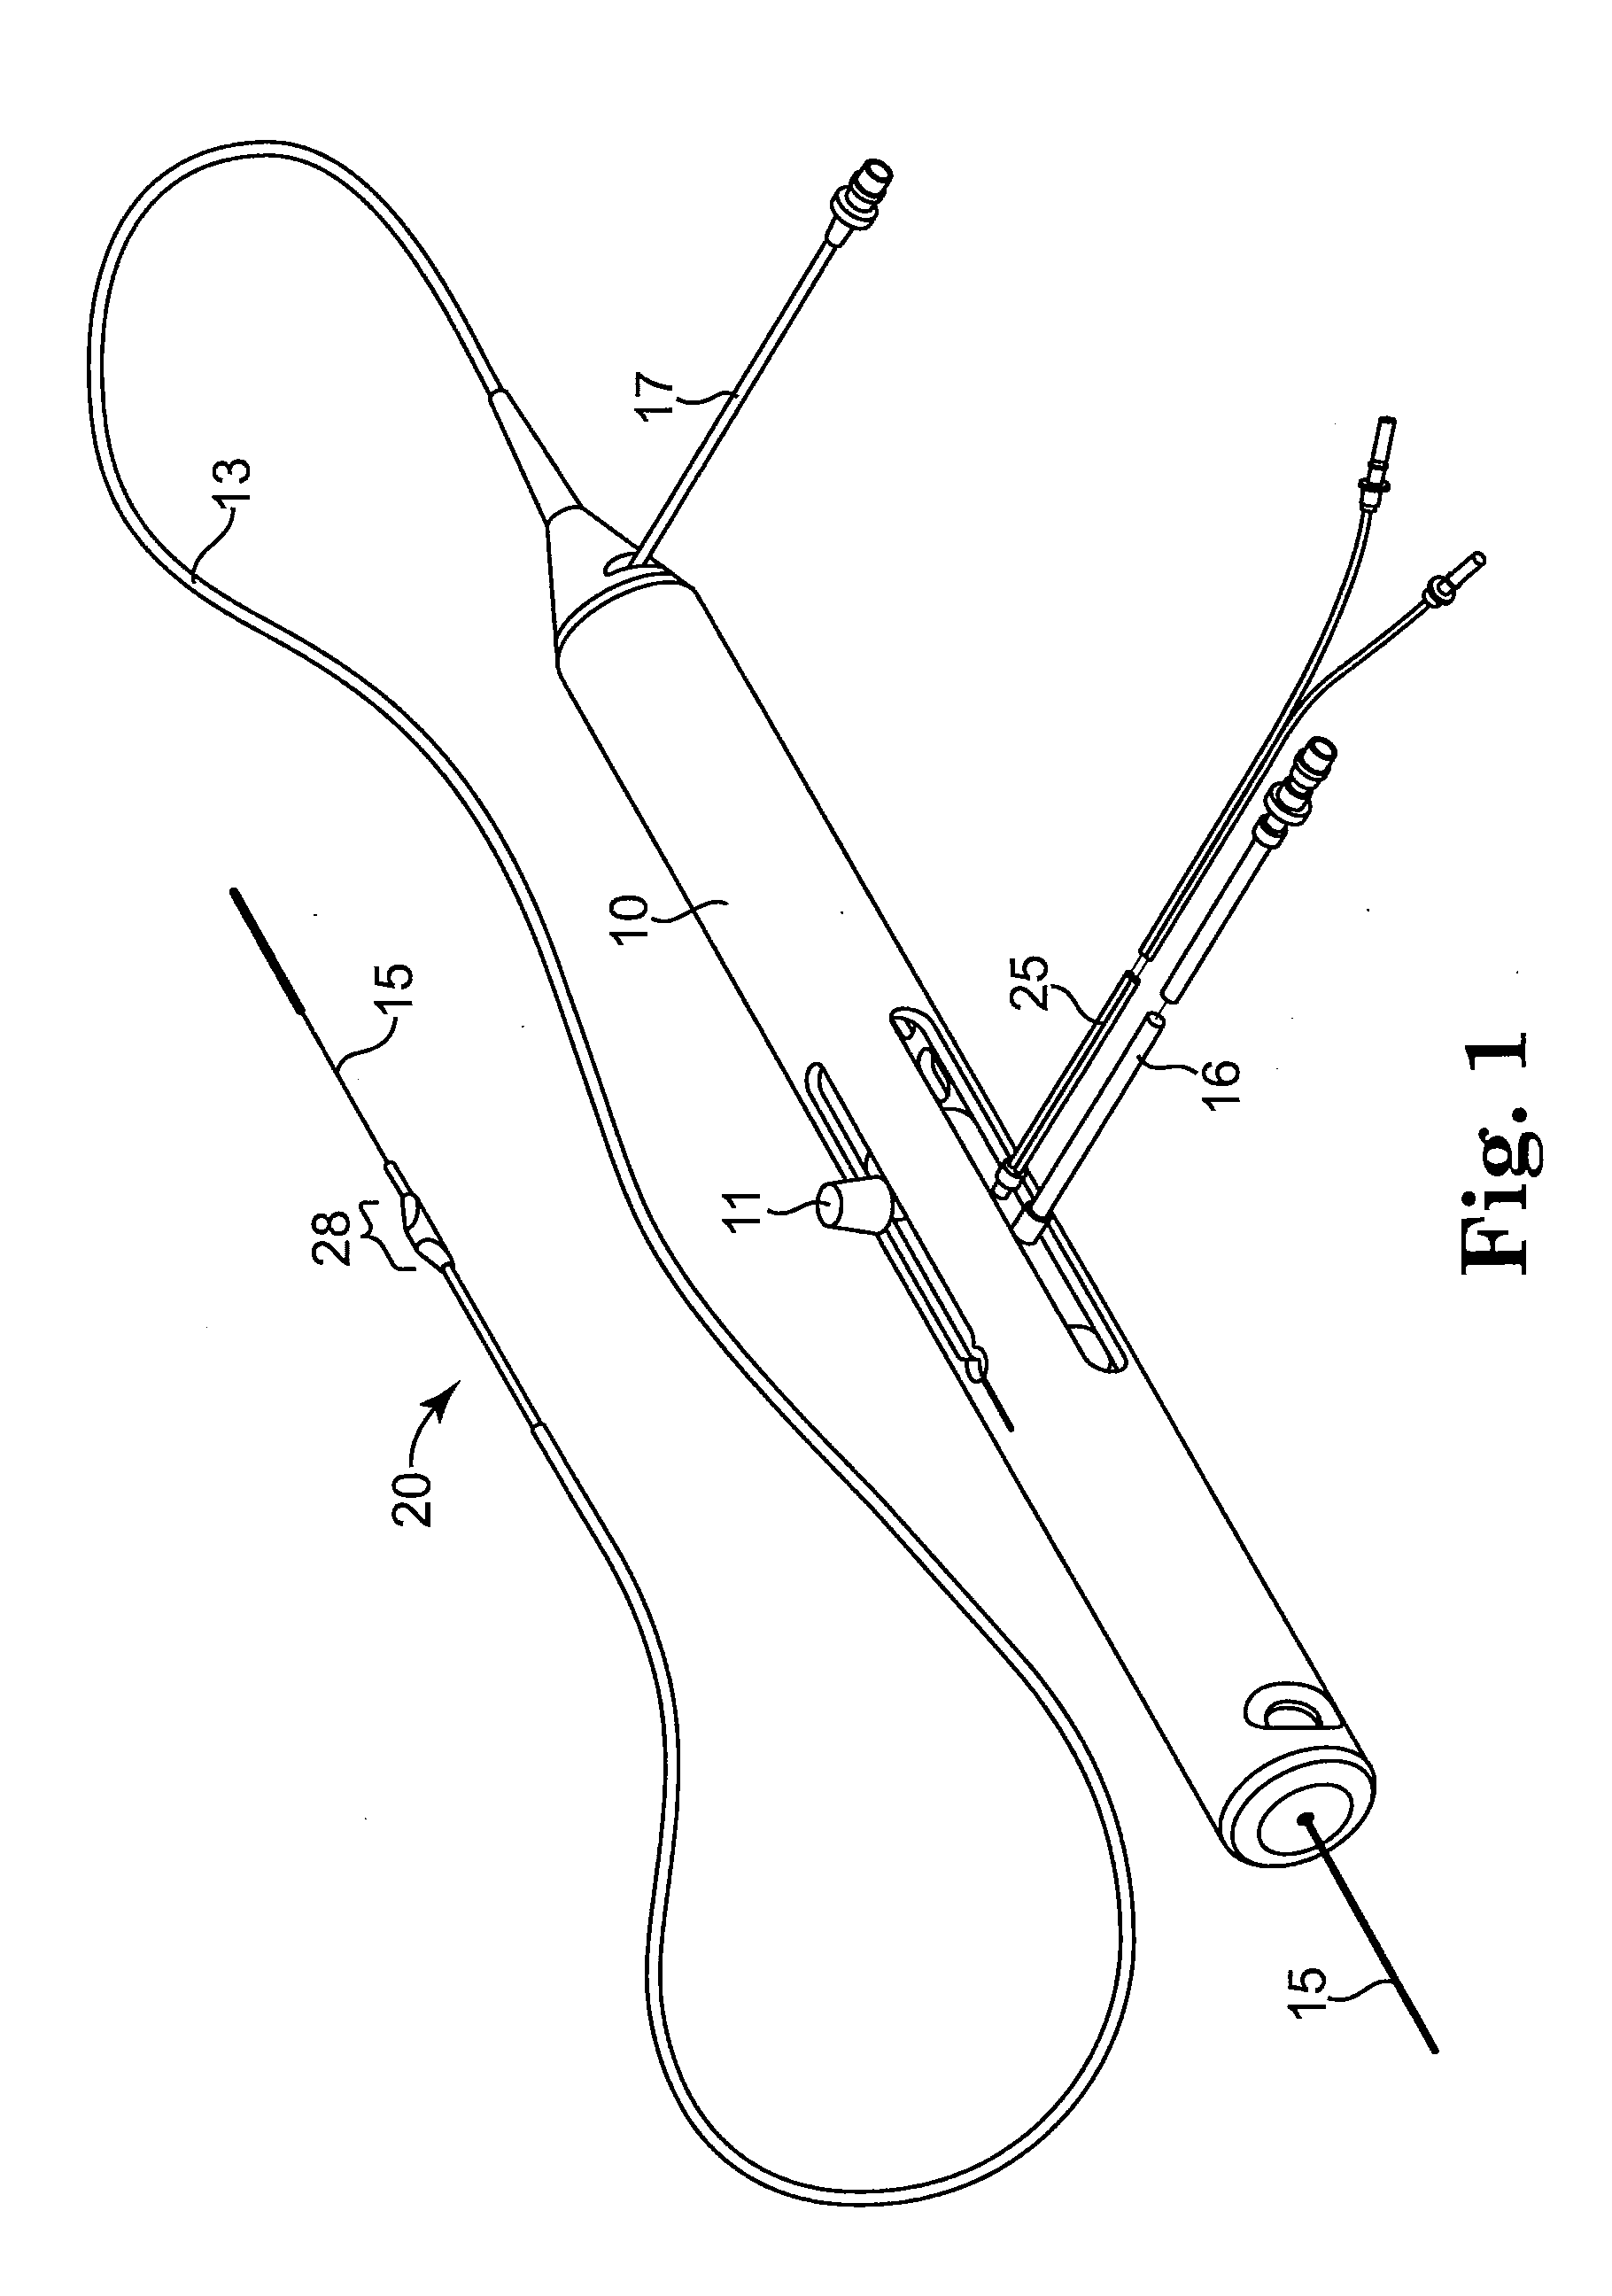 Eccentric abrading head for high-speed rotational atherectomy devices